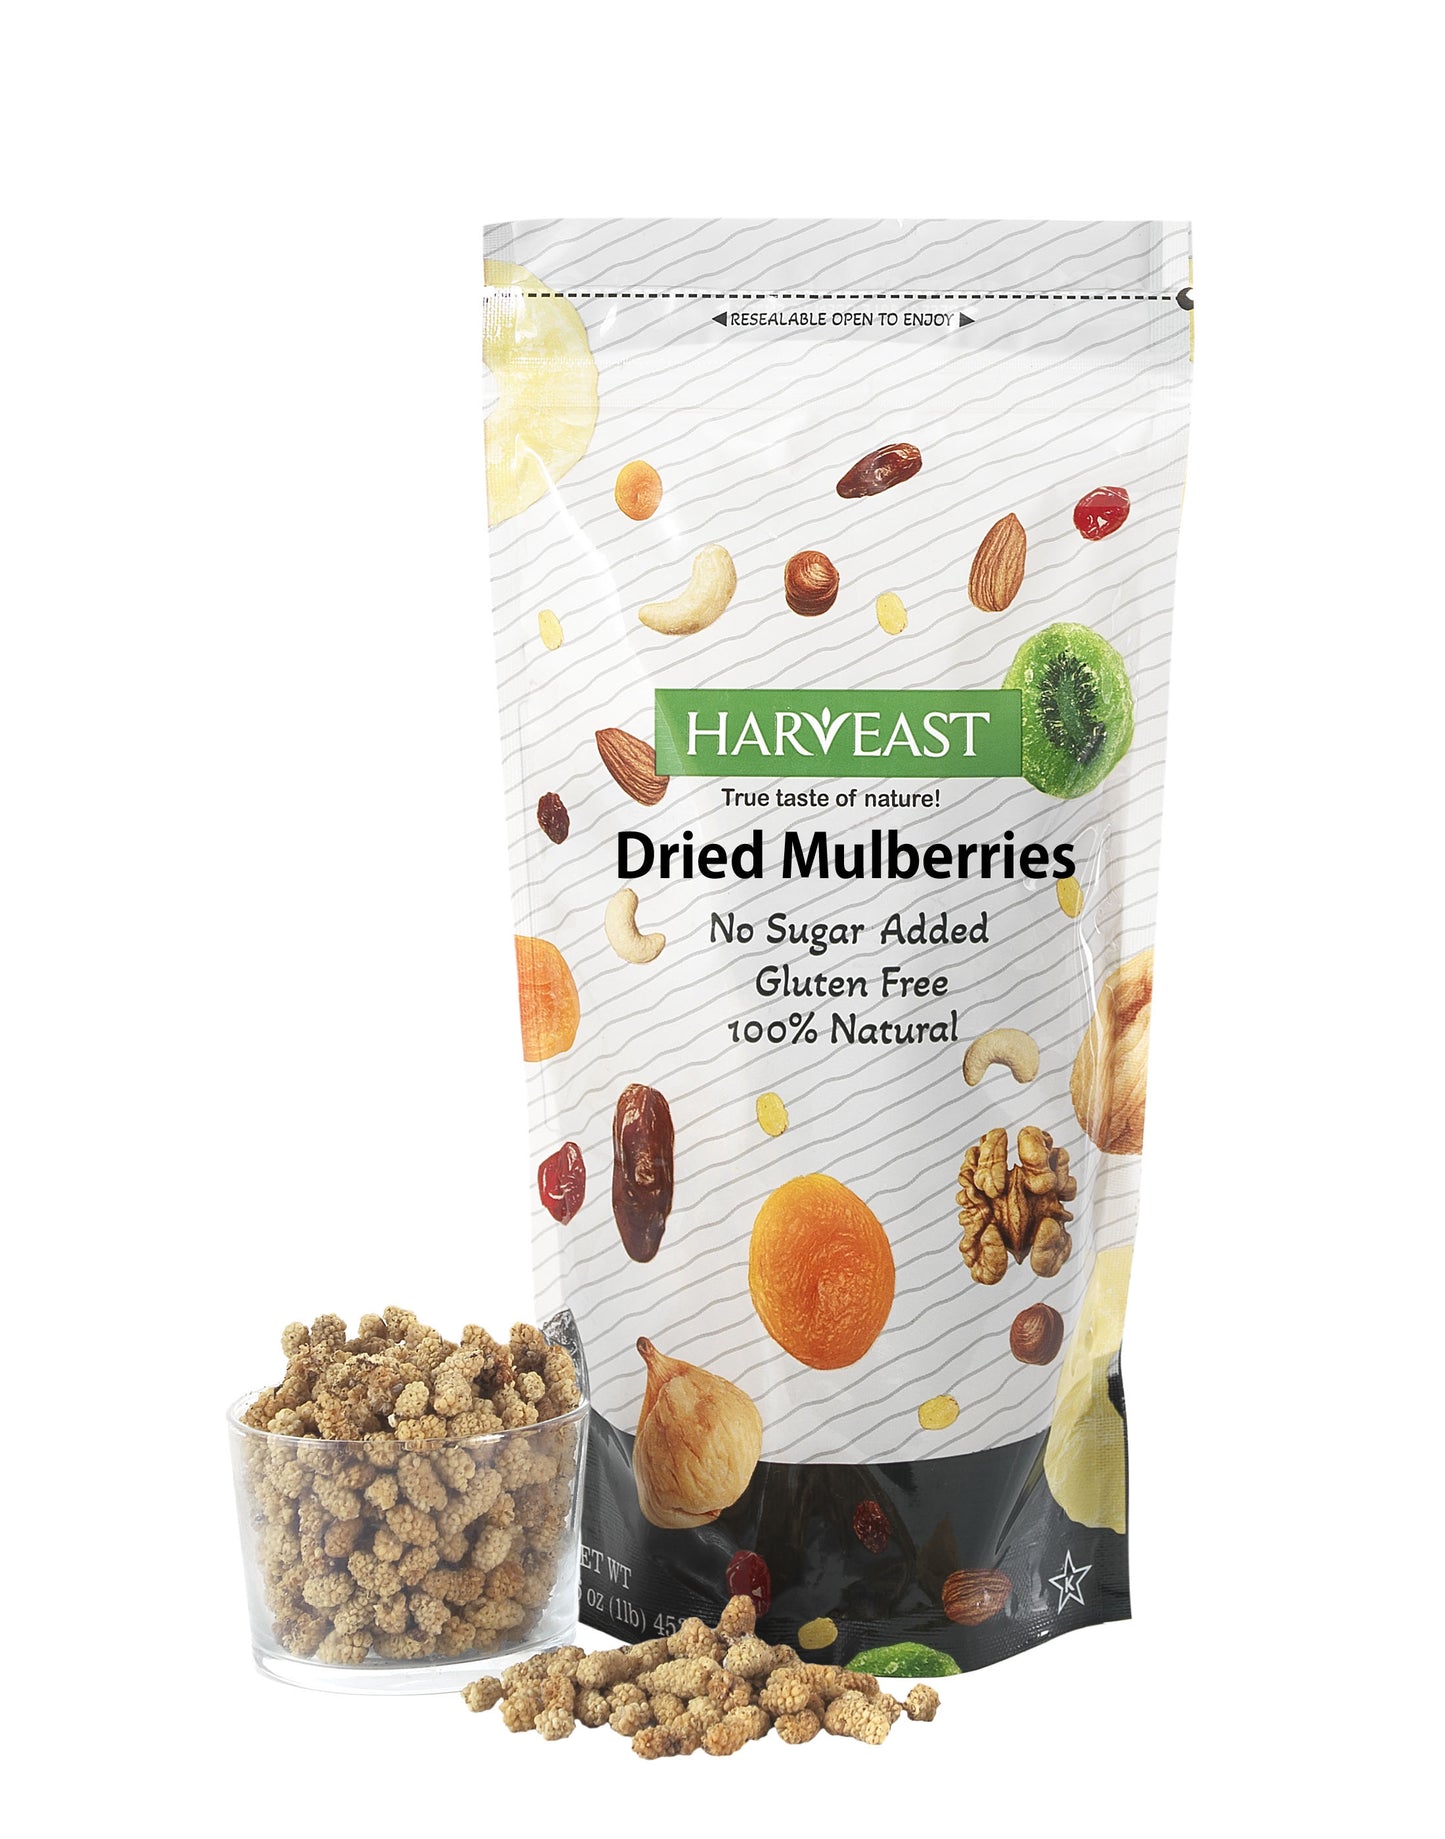 HARVEAST Turkish Dried Mulberries | Premium Gourmet Dehydrated Mulberries, No Sugar, Gluten Free, Kosher, Vegan, Non-GMO | Dried Berries in Resealable Bag, Delicious Healthy Snack | 8.81 Oz | 1 Pack